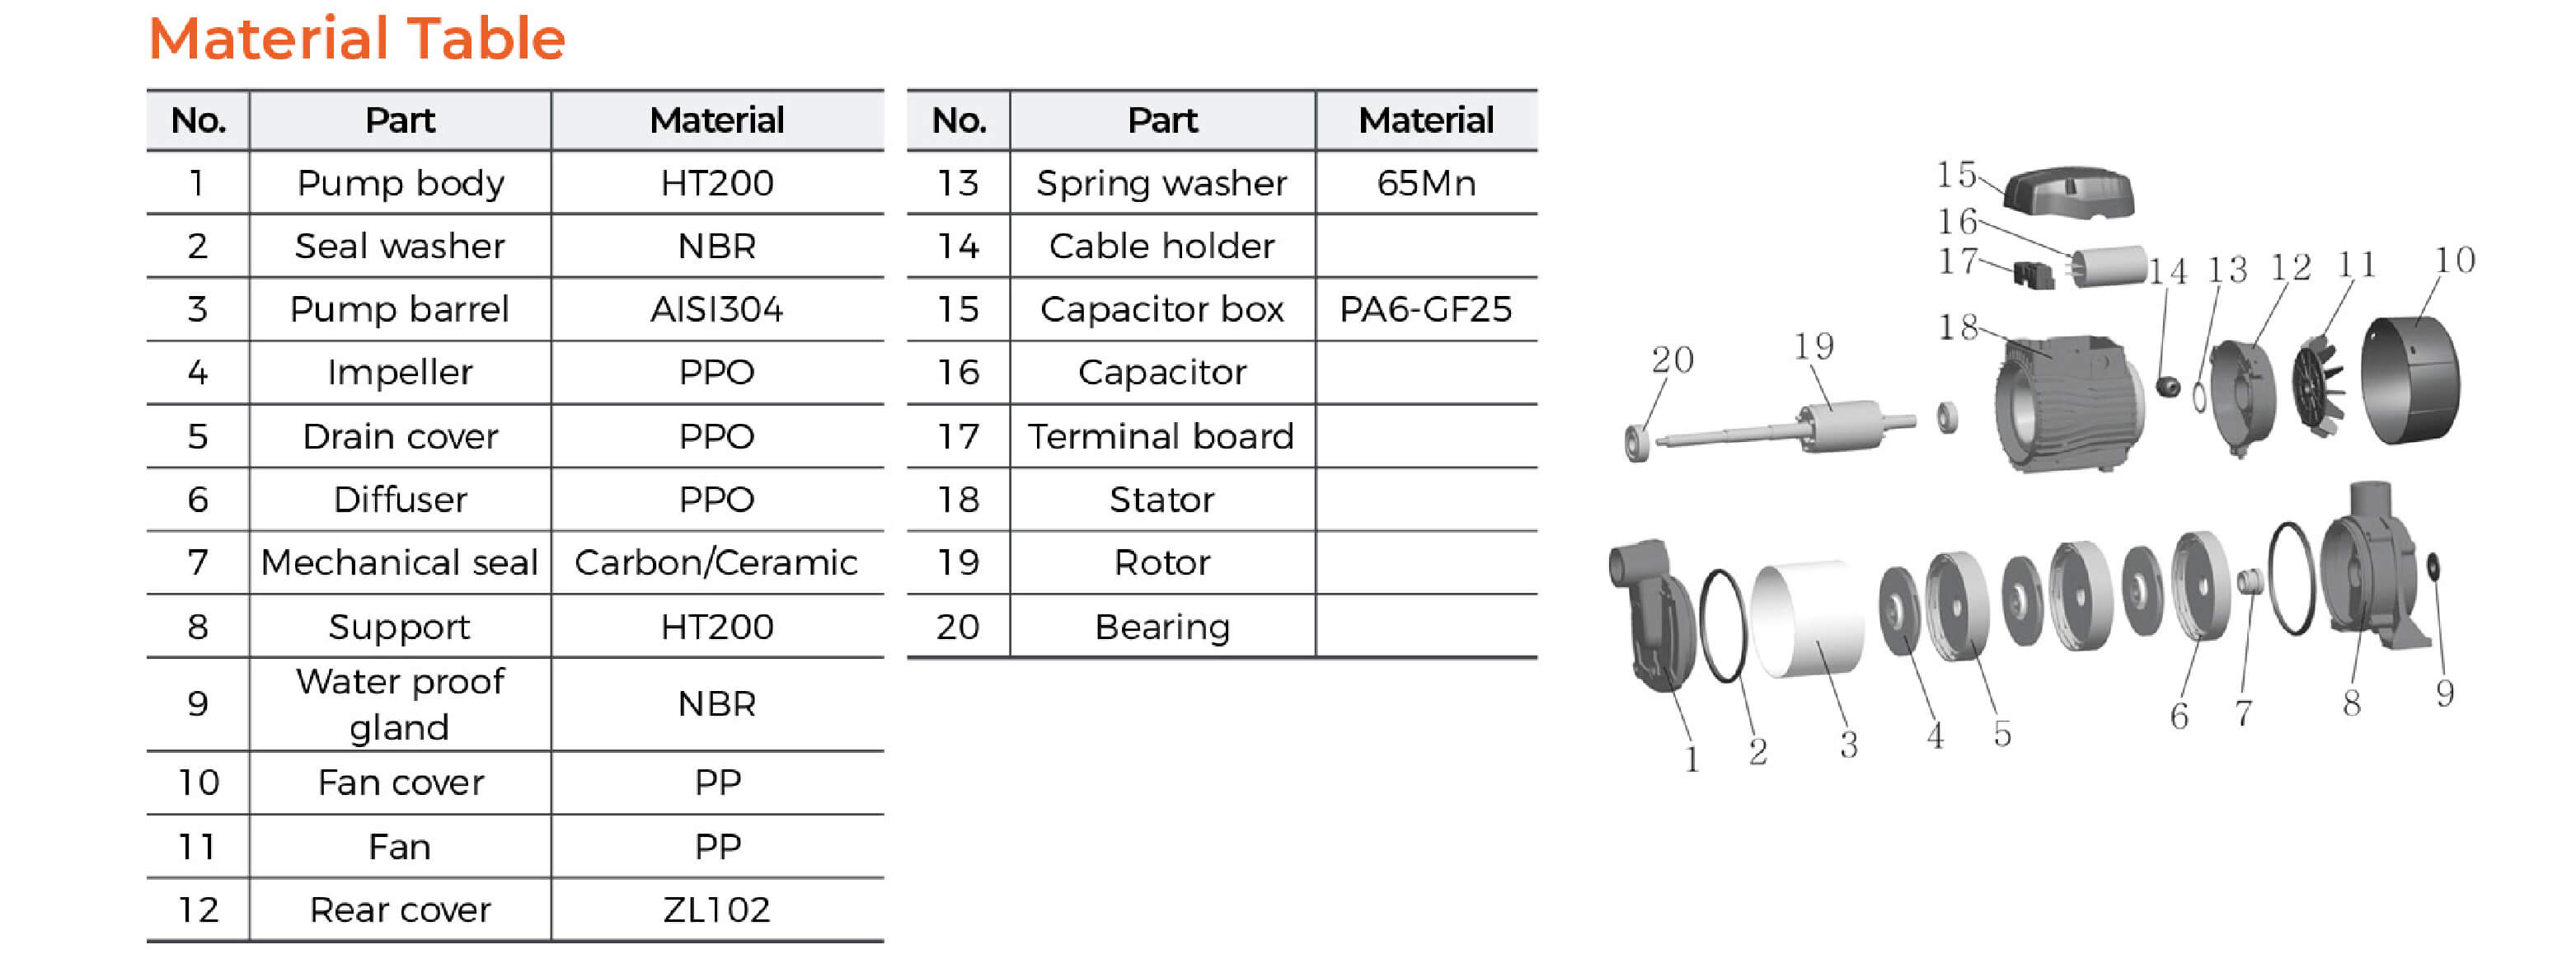 ACm-S Stainless Steel Multistage Centrifugal Pump Material Table